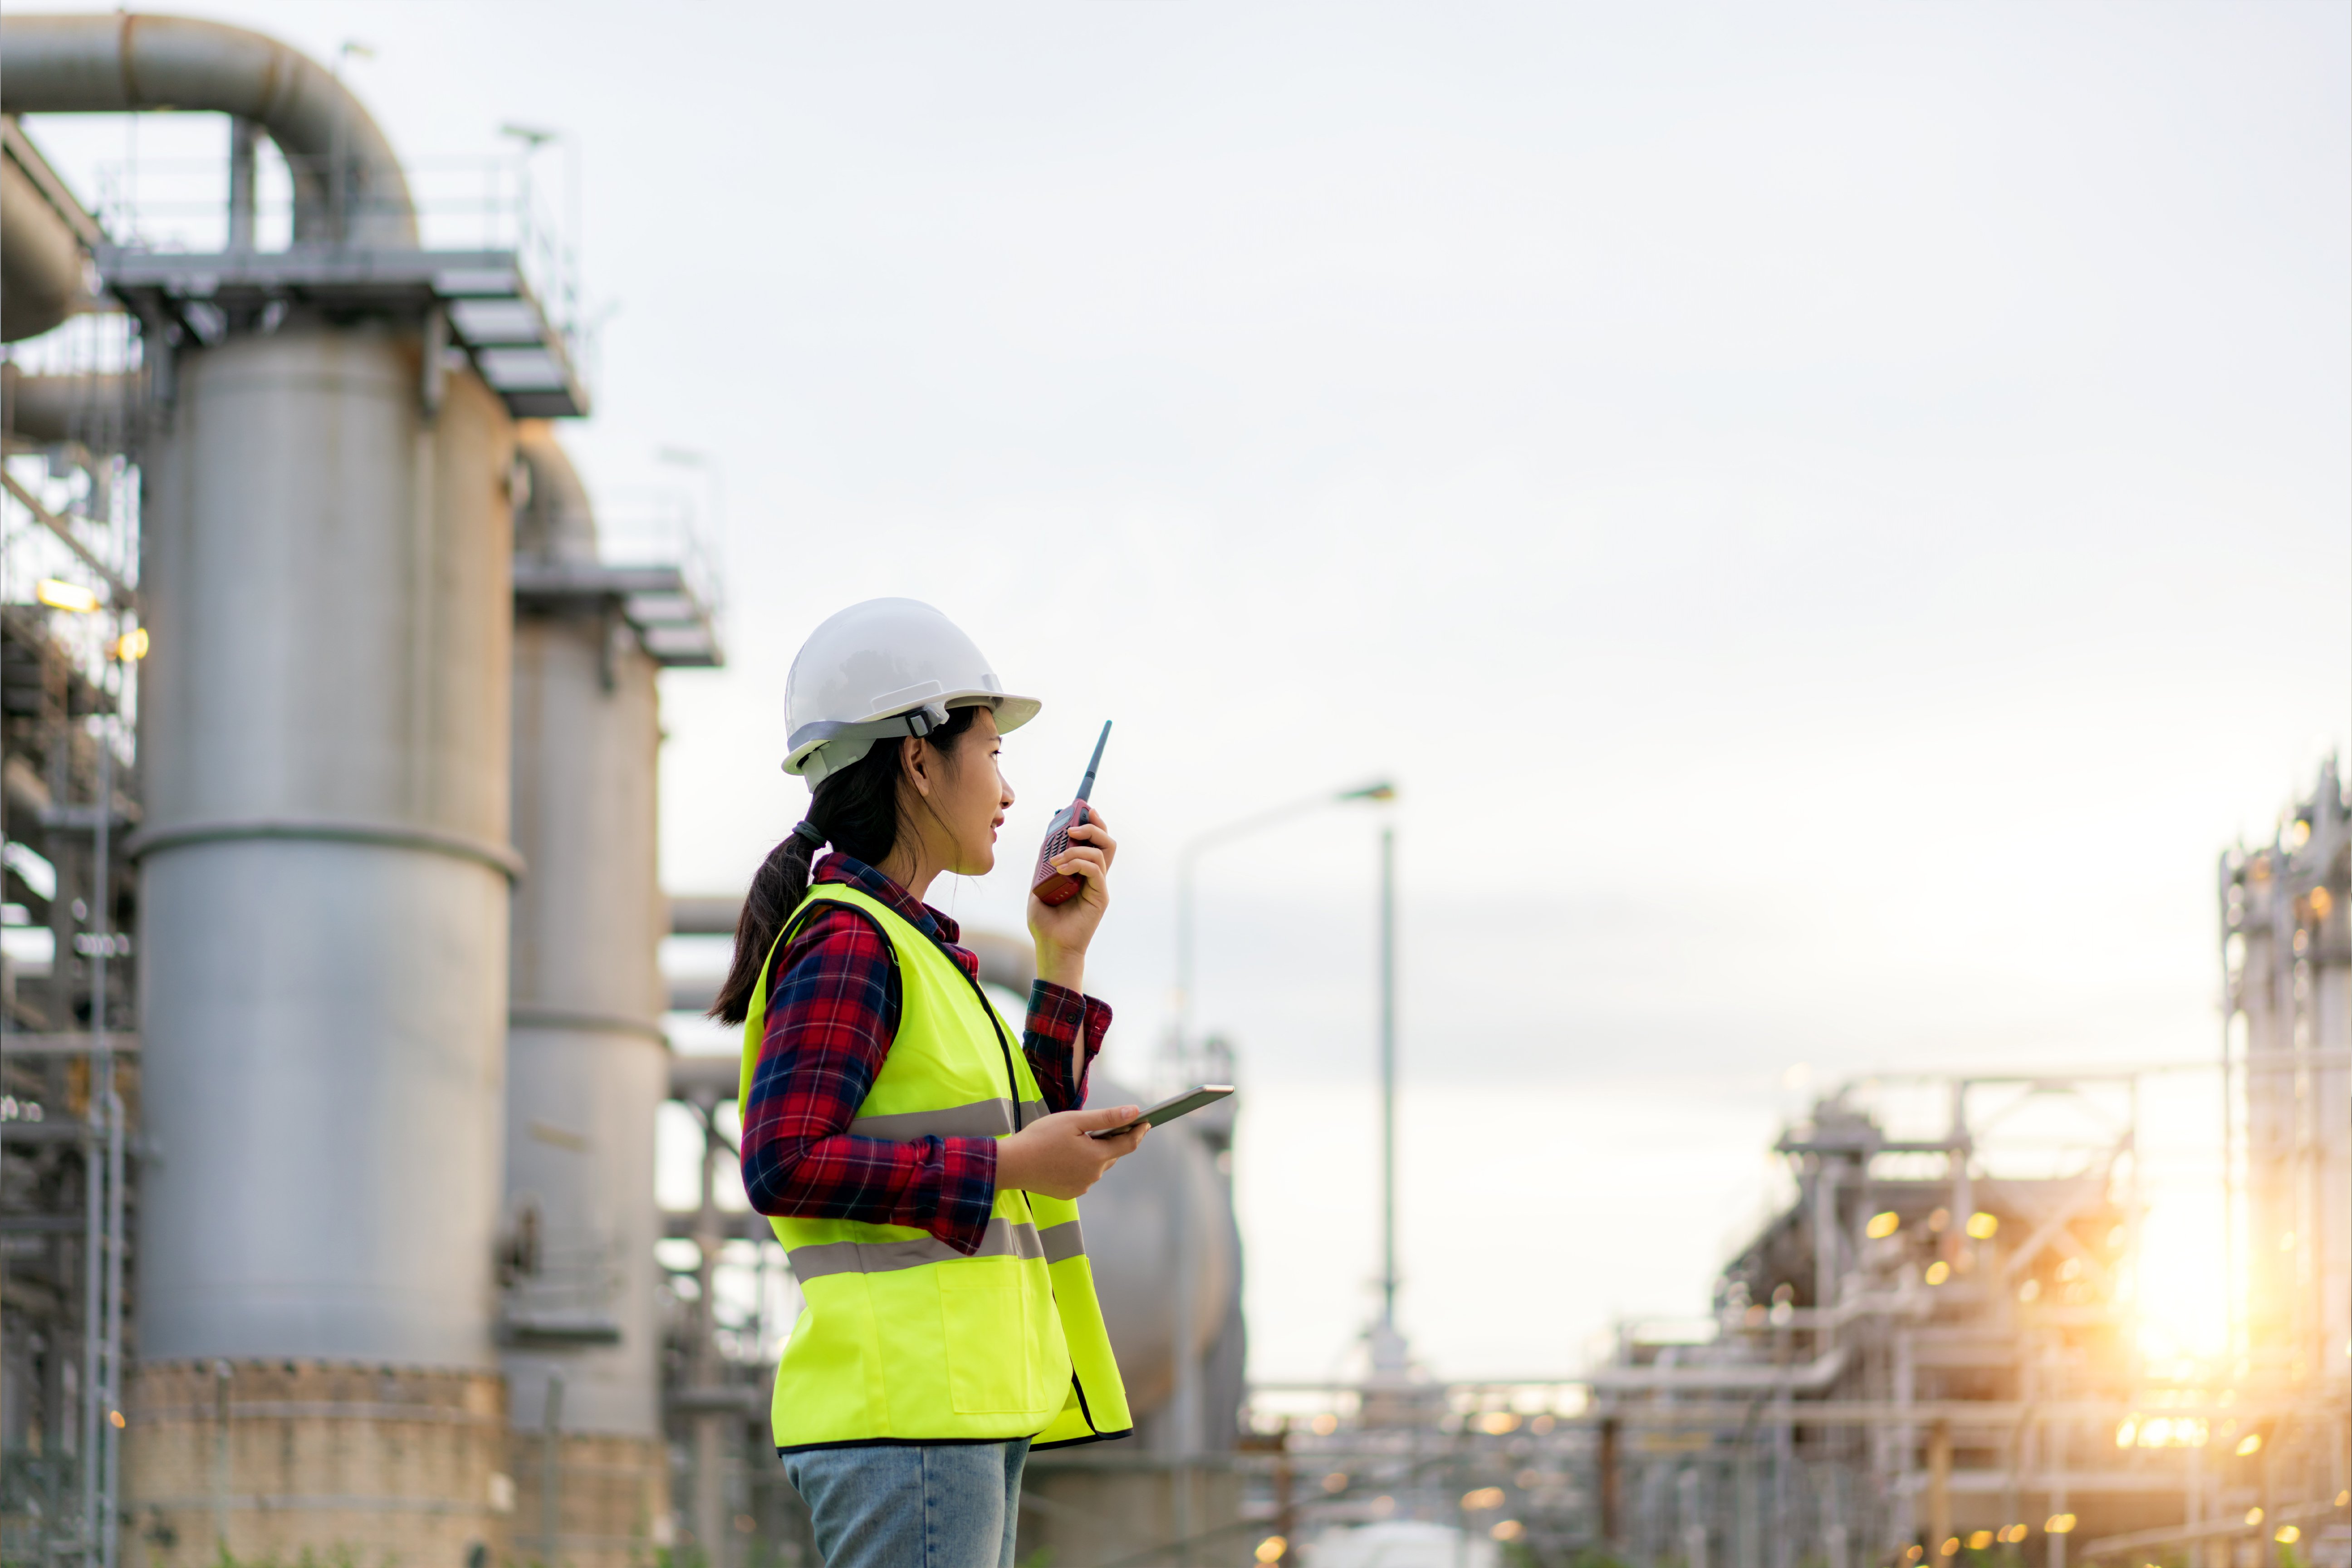 Asian woman technician Industrial engineer using walkie-talkie and holding bluprint working in oil refinery for building site survey in civil engineering project